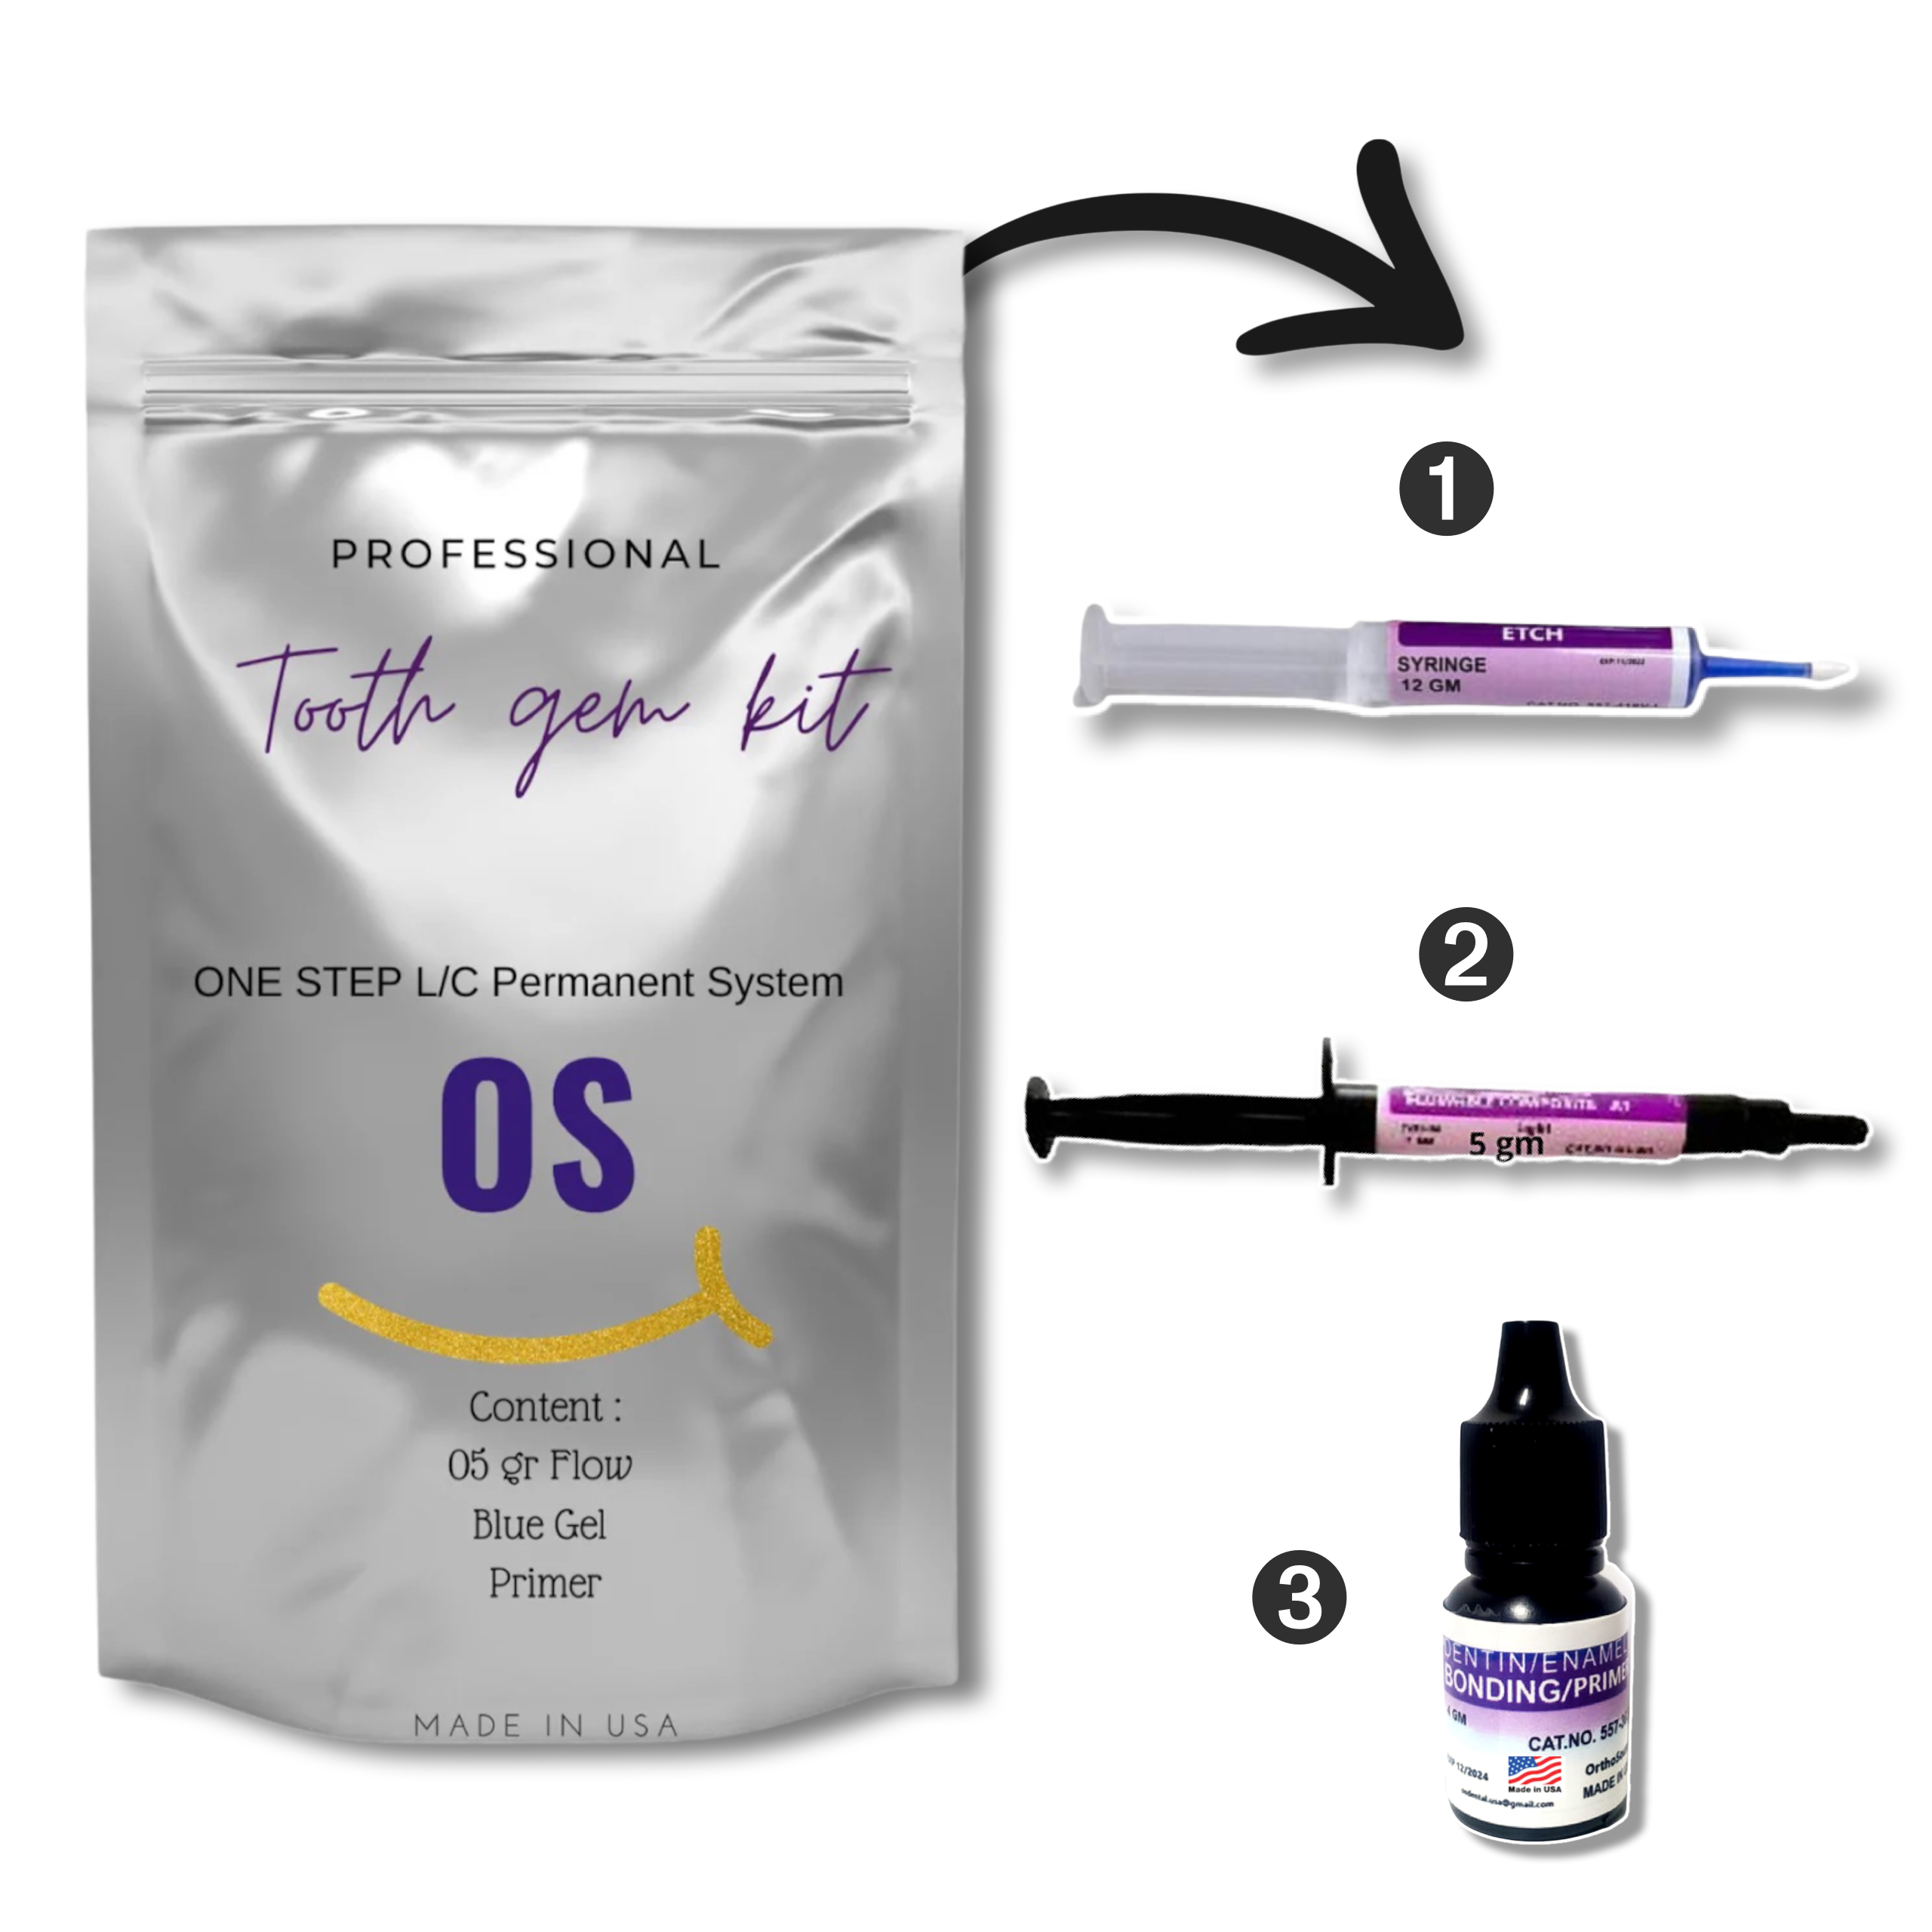 Orthodontic Braces Adhesive - Tooth Gem glue - Light Cure - Permanent – OS  company